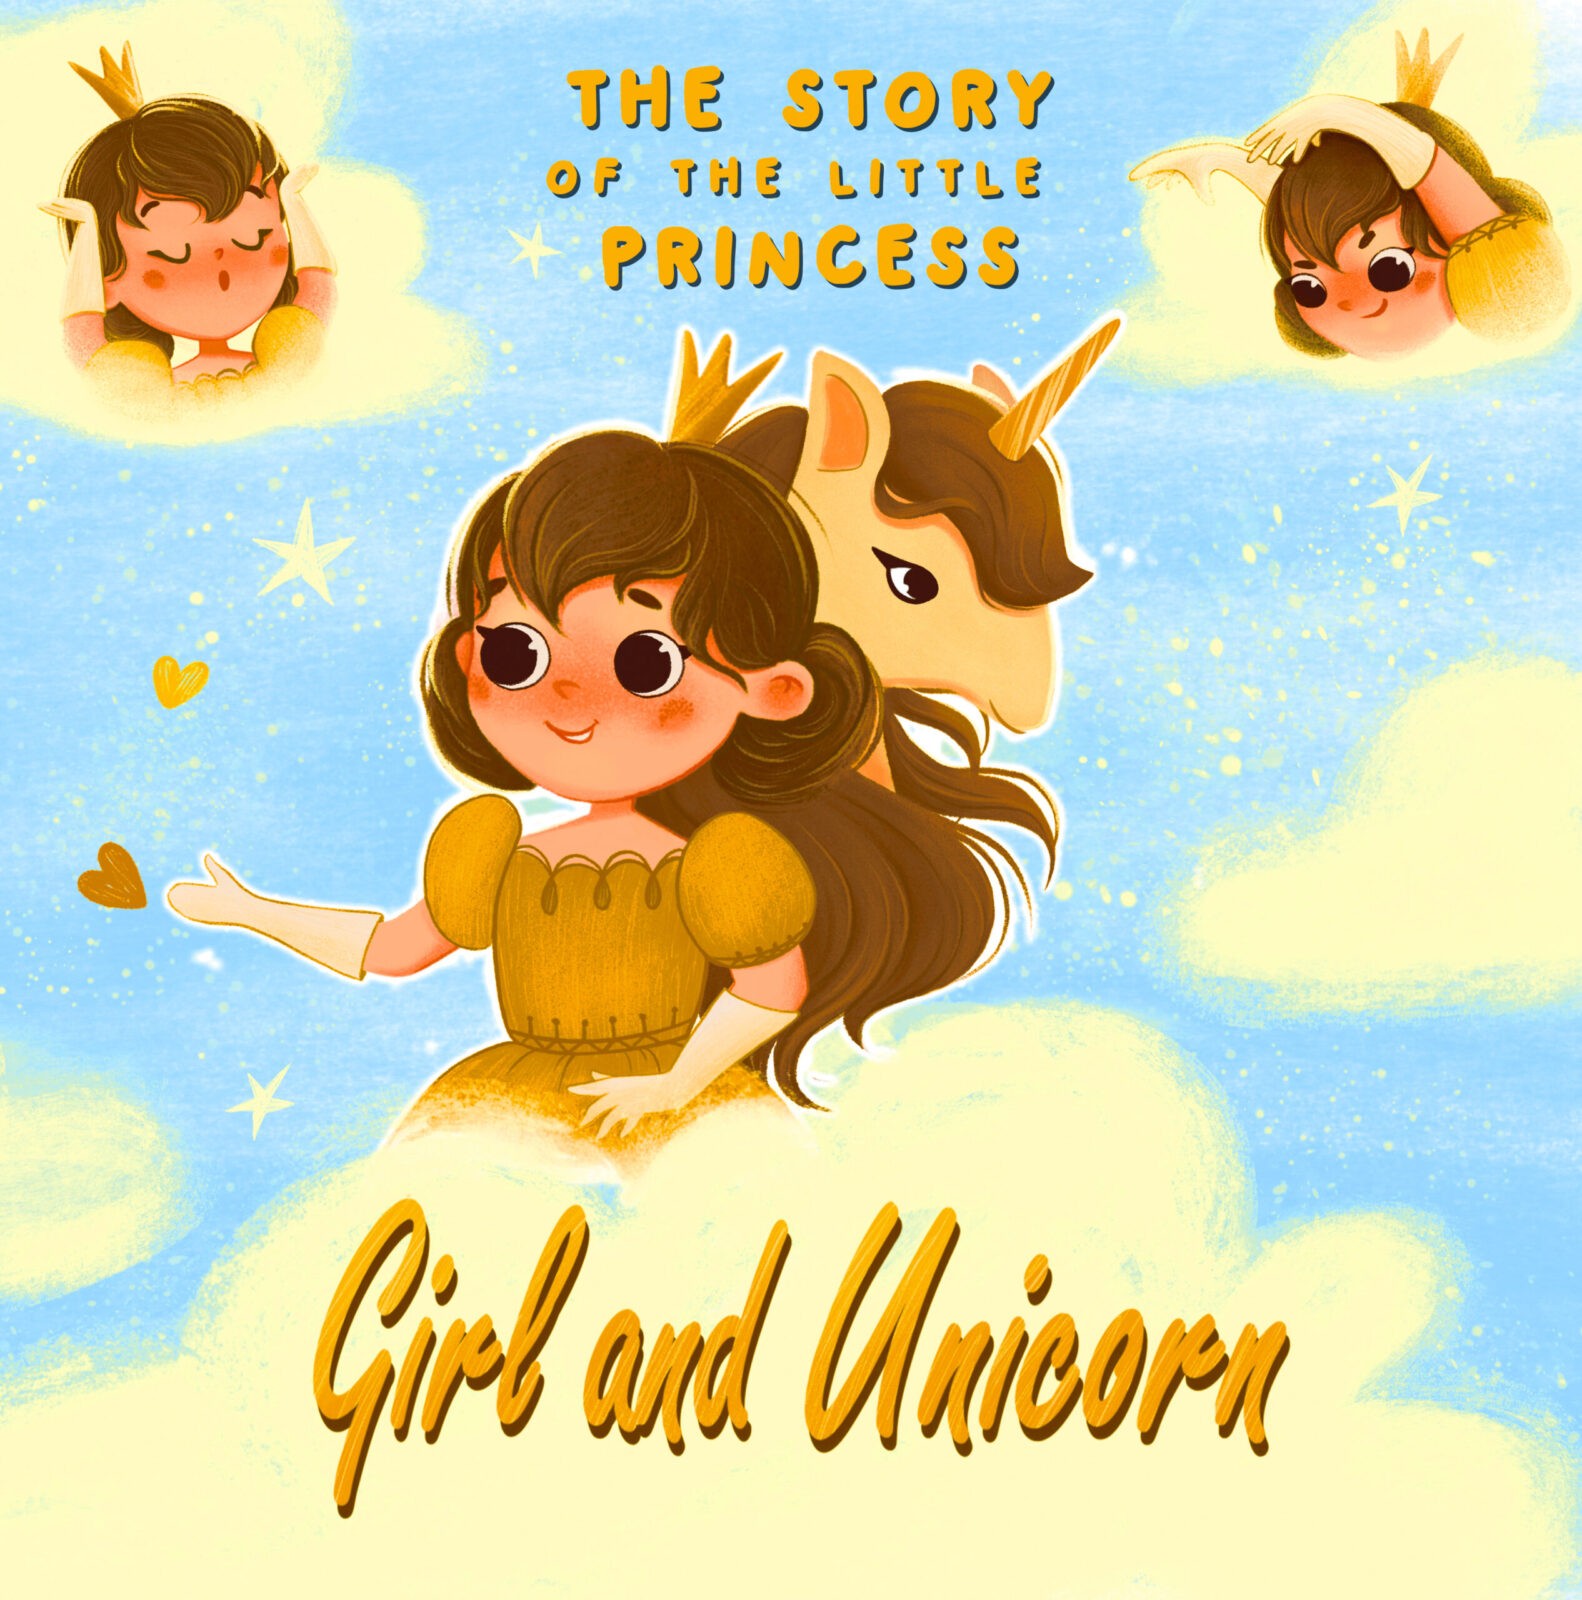 Girl and Unicorn - The story of the little princess